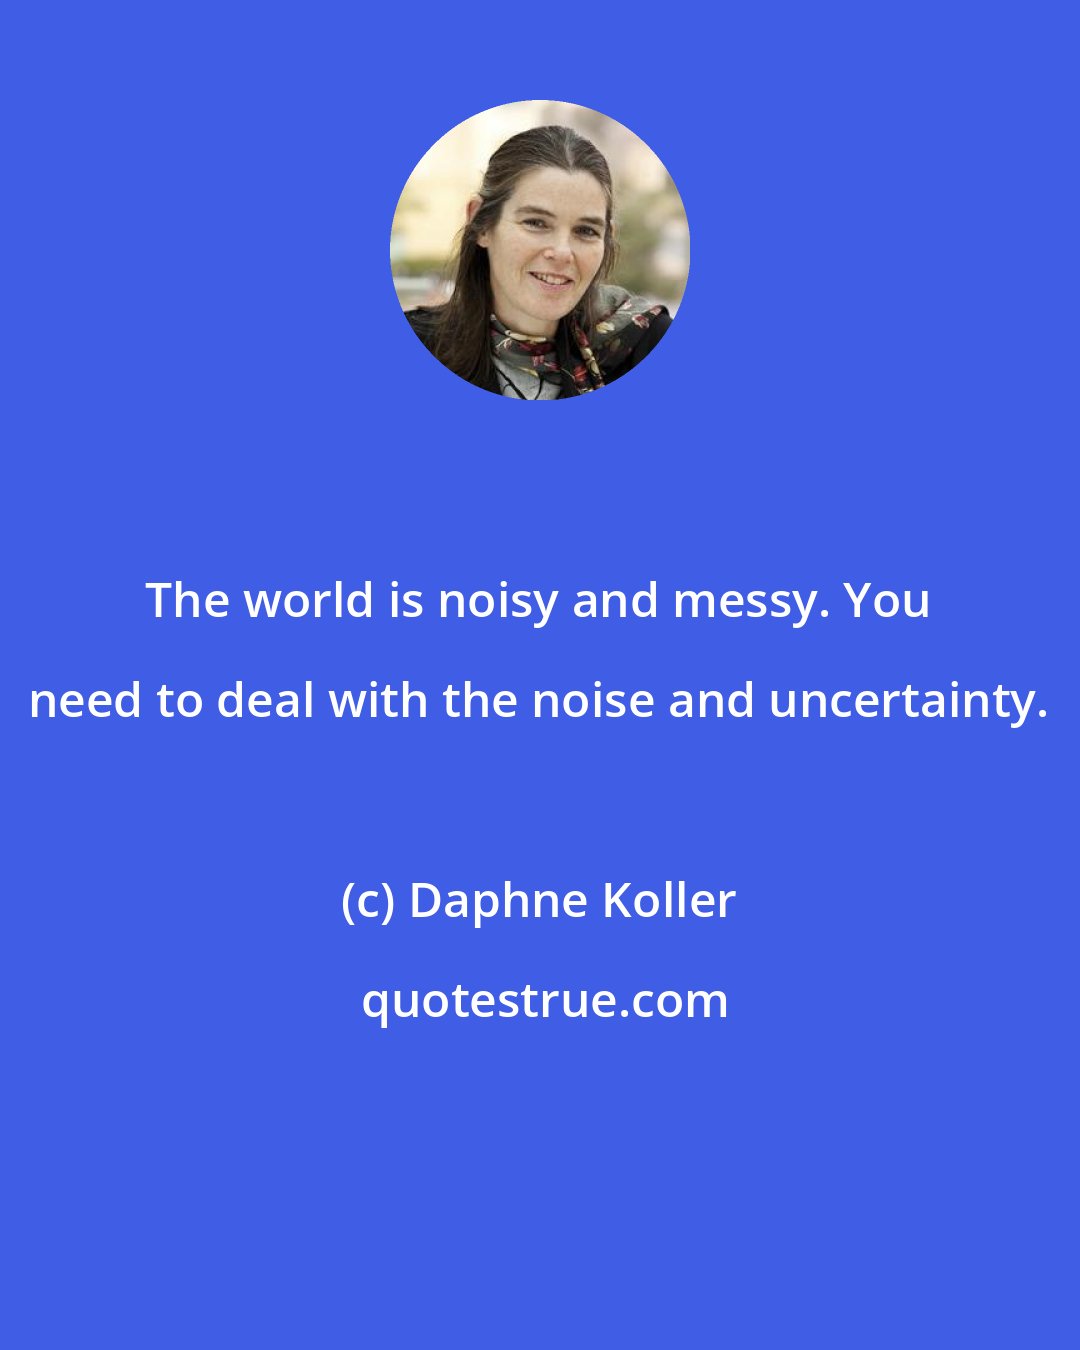 Daphne Koller: The world is noisy and messy. You need to deal with the noise and uncertainty.